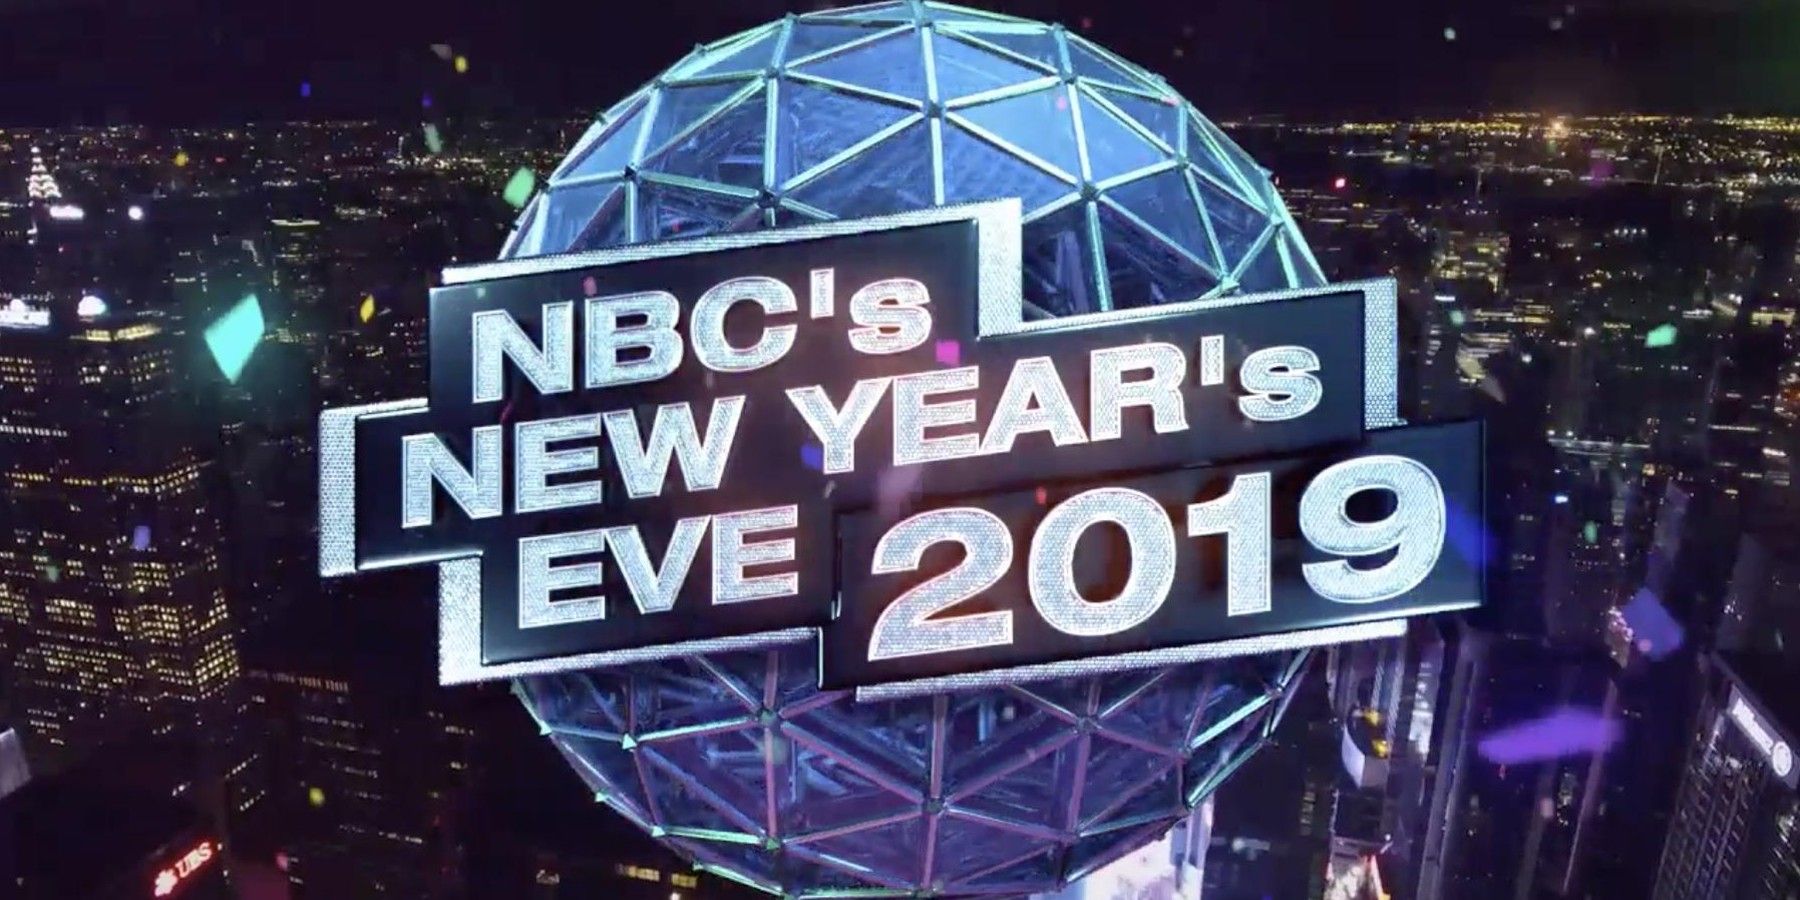 NBC's New Year's Eve 2019